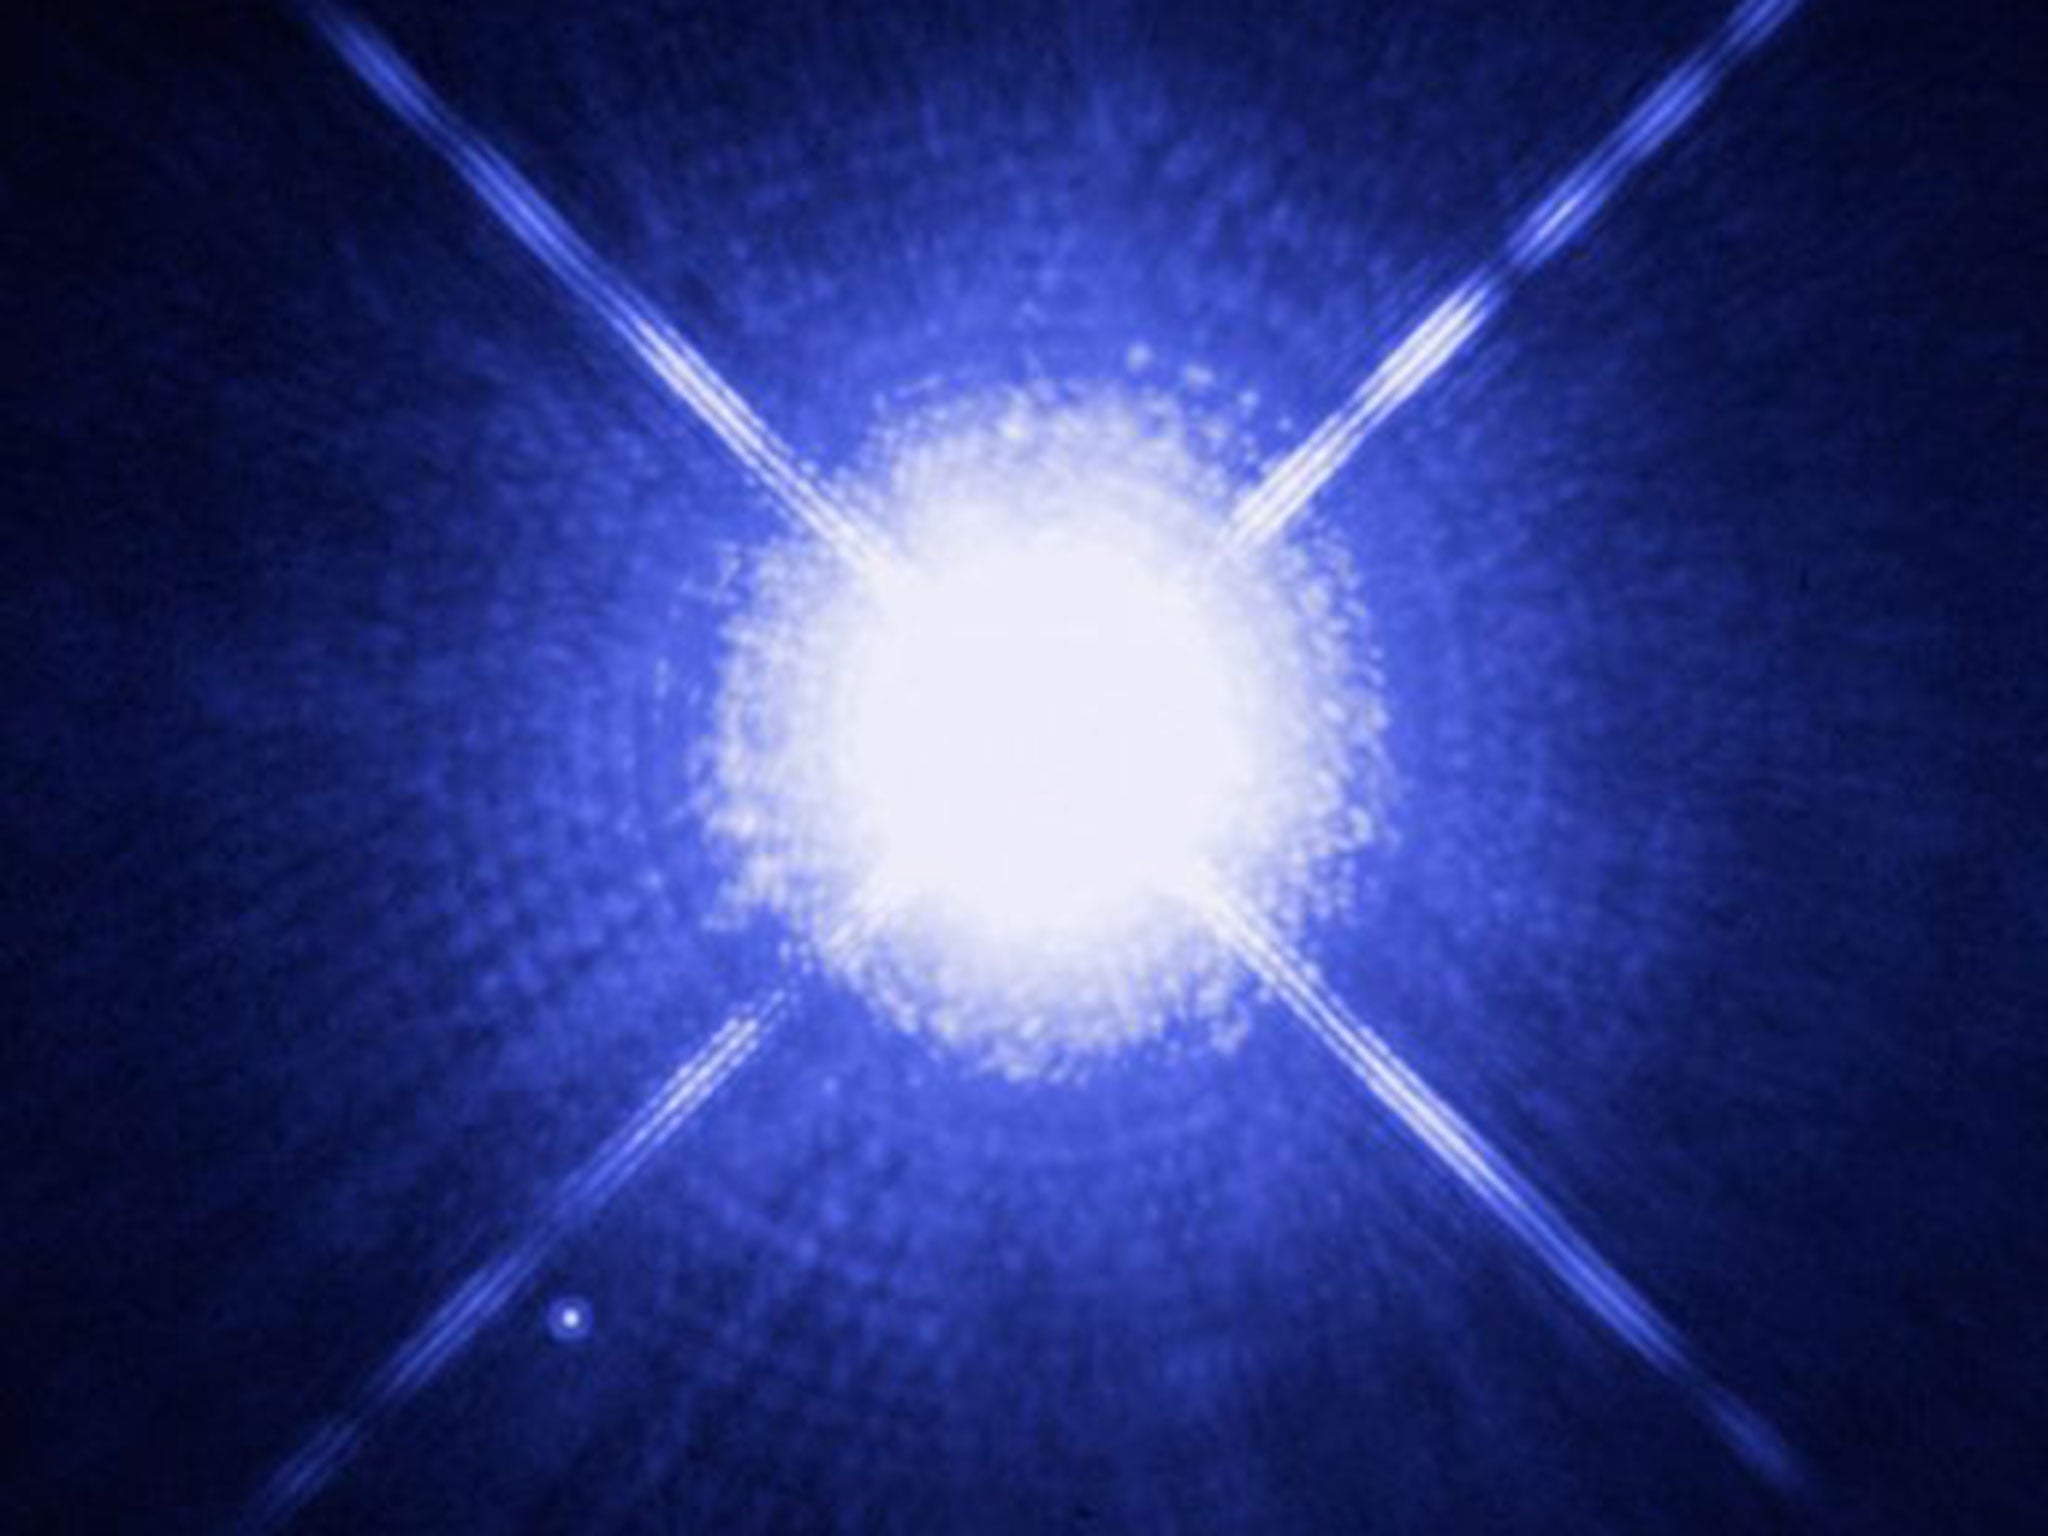 Typical white dwarfs, like this one, have an atmosphere dominated by hydrogen and helium, light gases that float to the top and block the star from view